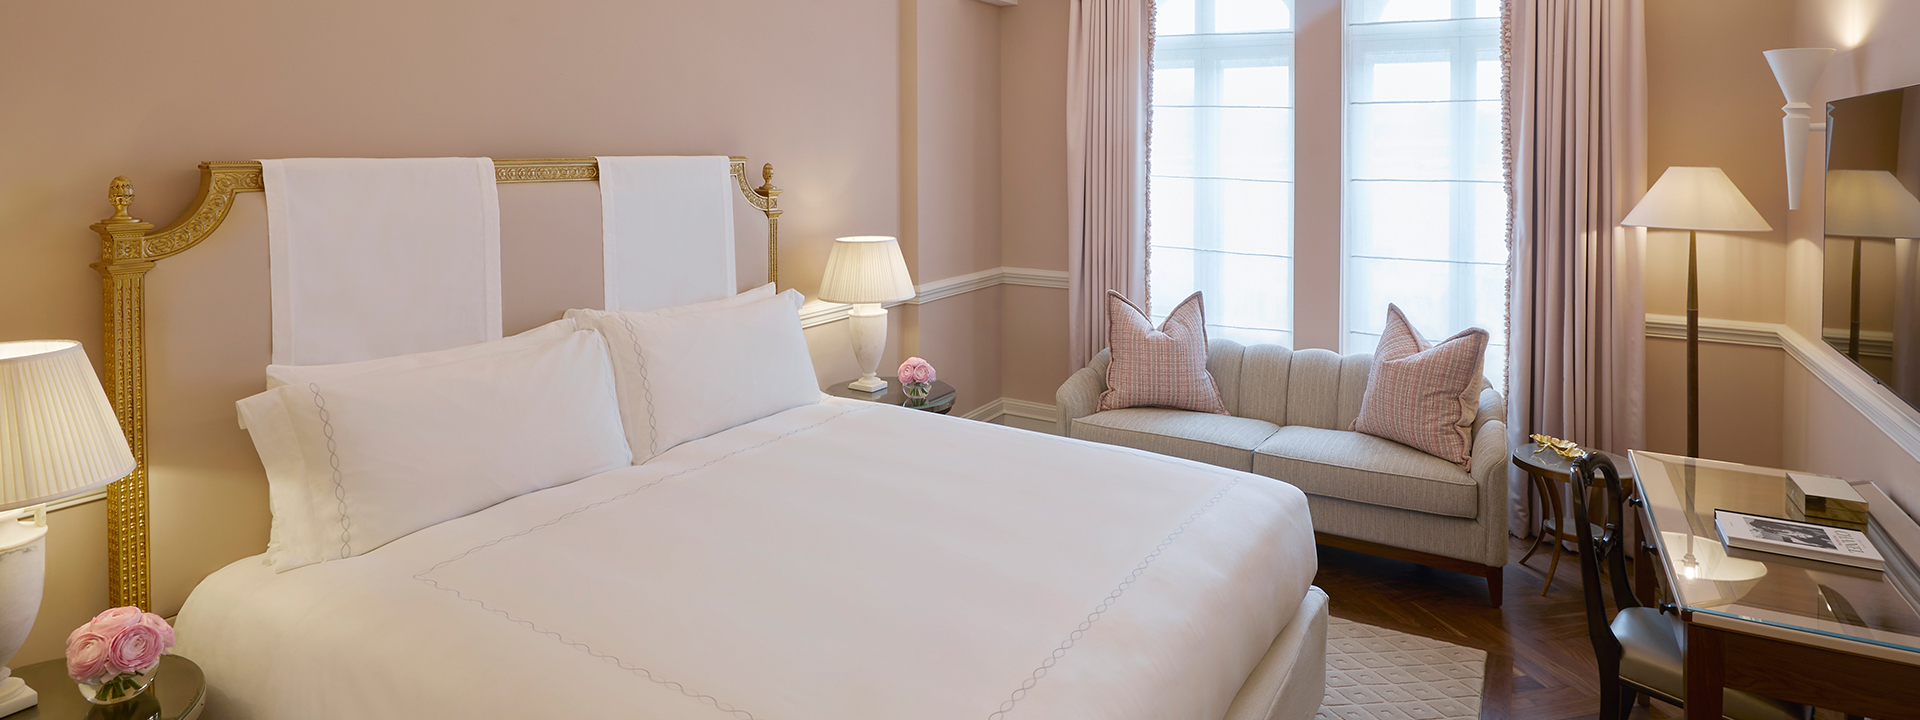 King Bed in the Mayfair Room, surrounded by warm beige colours in the interior, decorated with flower arrangements.